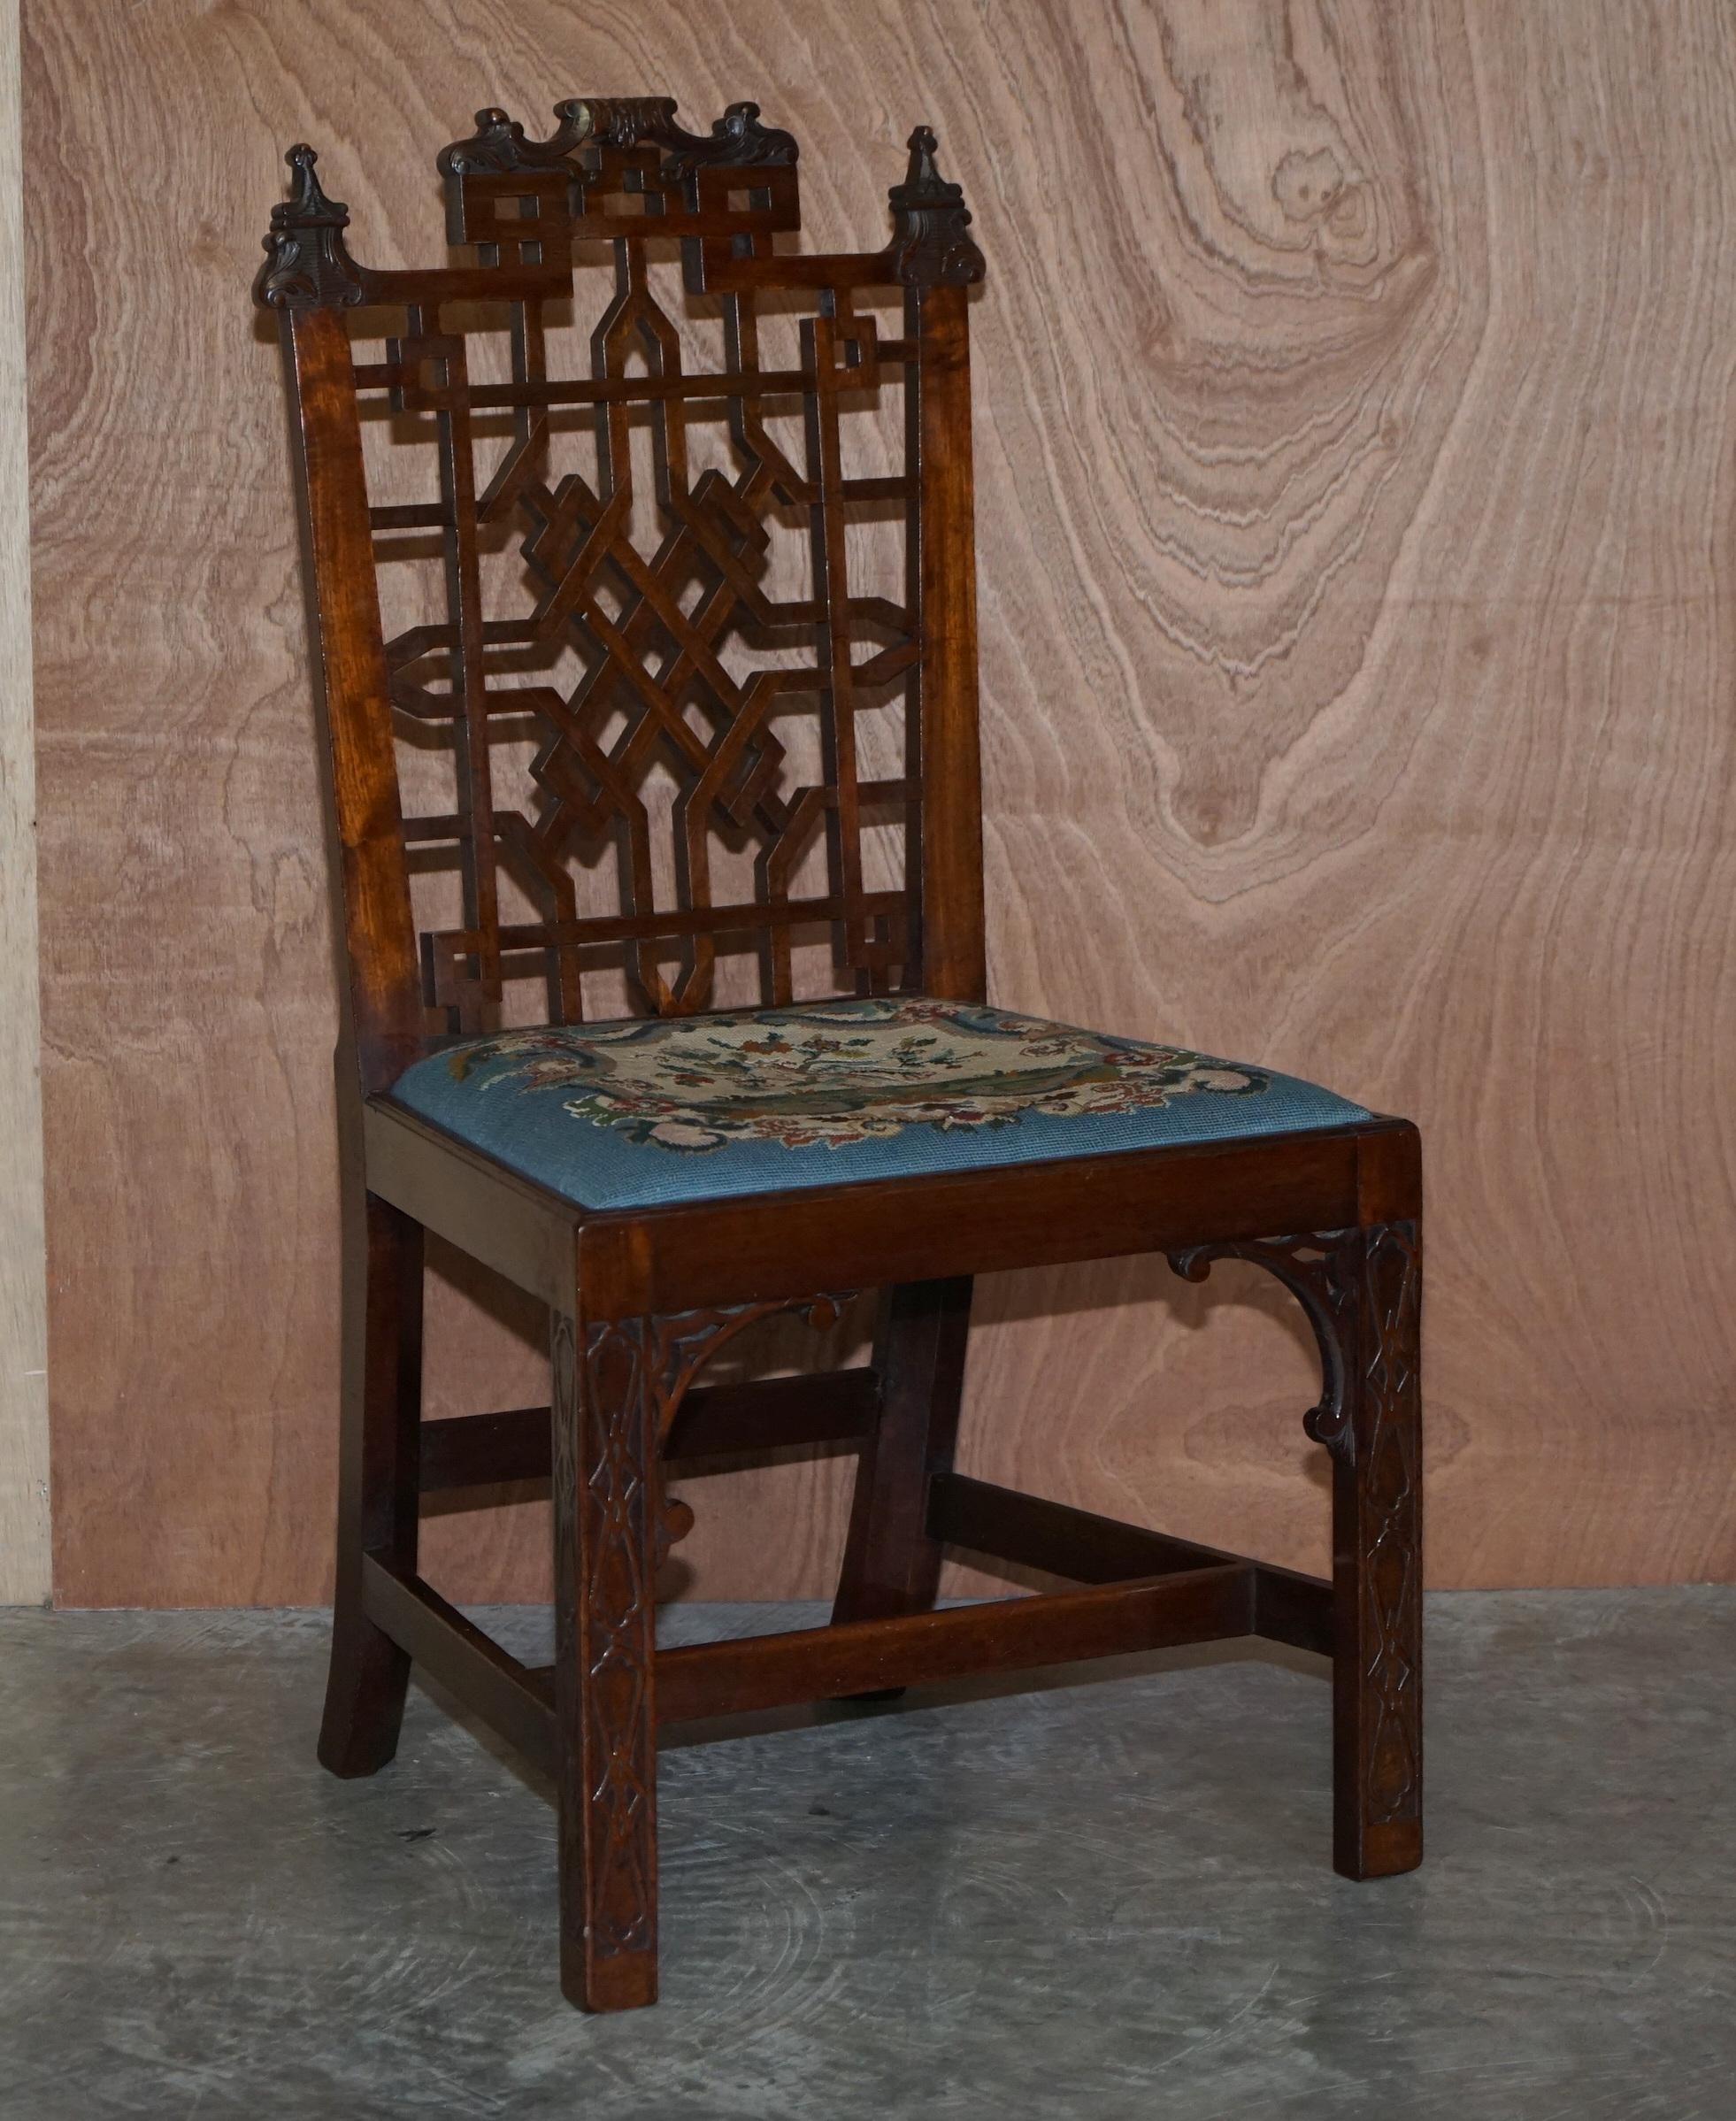 We are delighted to offer this important suite of museum quality, George III circa 1760-1765, Thomas Chippendale Chinese Pagoda top dining chairs with the original embroidered seat pads

Where to begin, if you’re looking at this listing then the